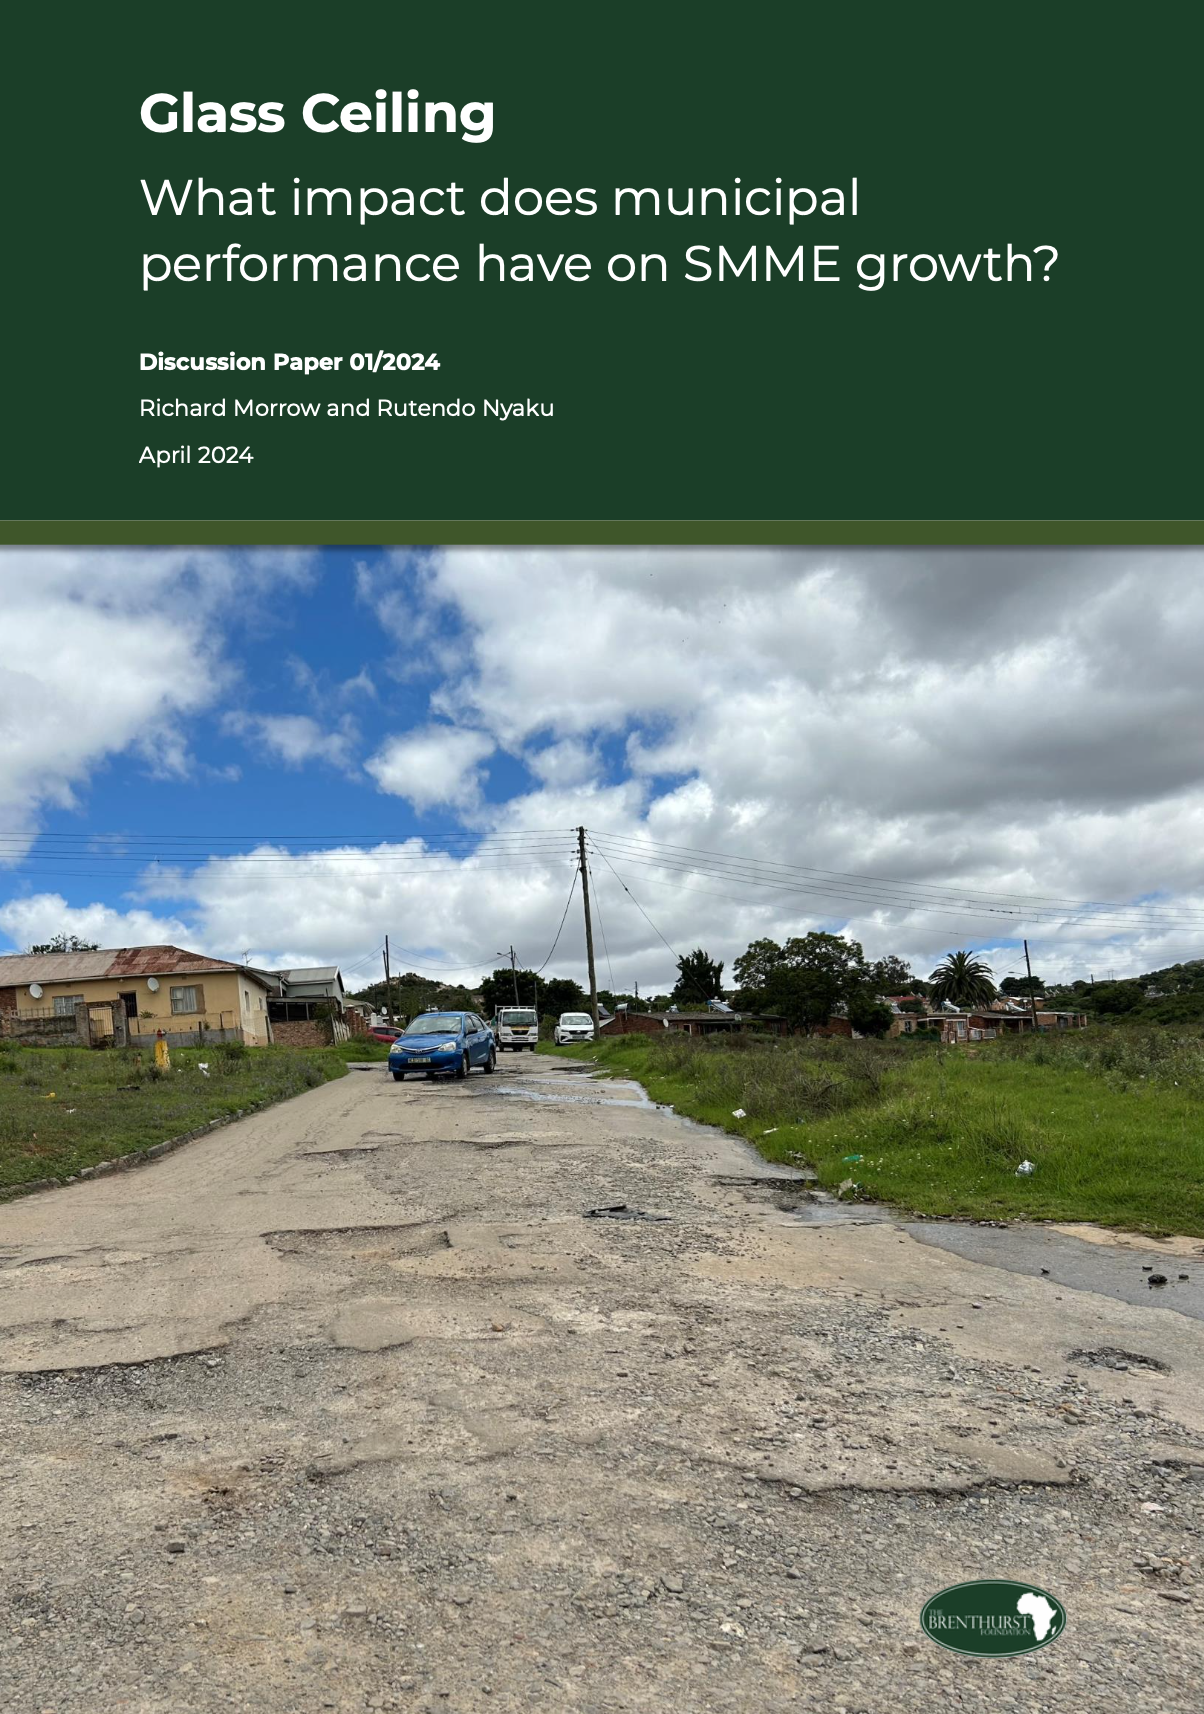 Glass Ceiling: What Impact does Municipal Performance have on SMME Growth?